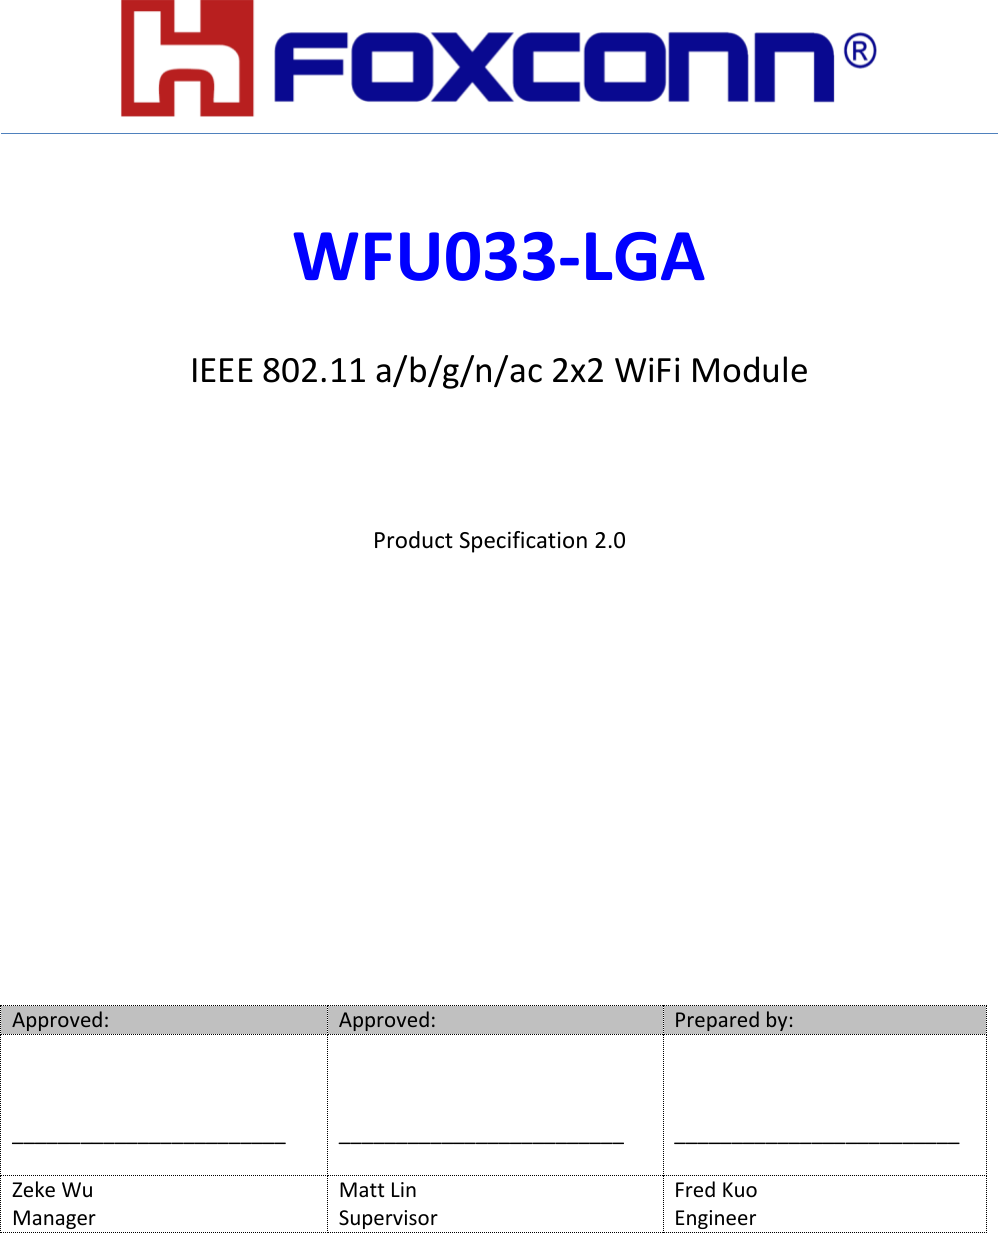         WFU033-LGA  IEEE 802.11 a/b/g/n/ac 2x2 WiFi Module   Product Specification 2.0         Approved: Approved: Prepared by:    ________________________     _________________________    _________________________ Zeke Wu Matt Lin Fred Kuo Manager Supervisor Engineer  